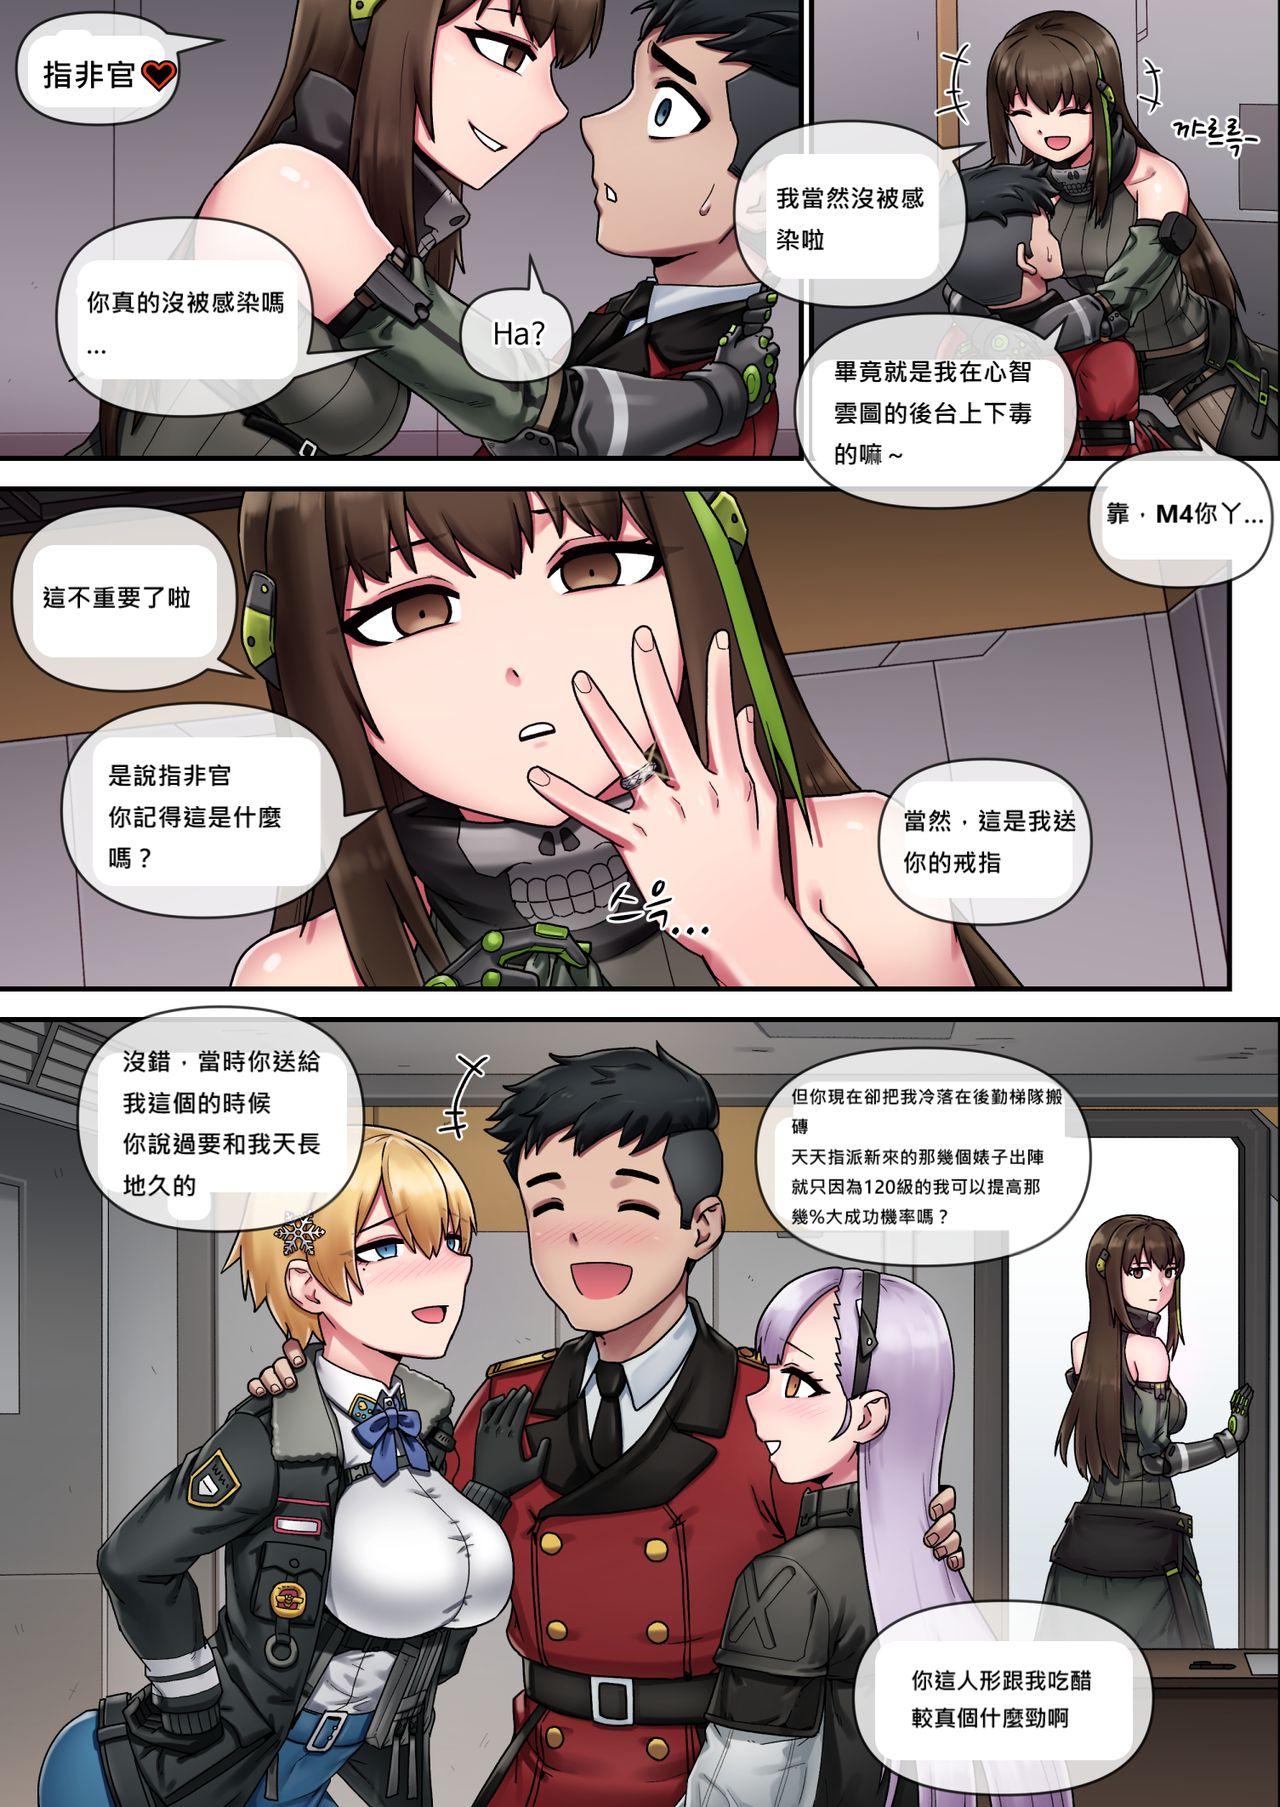 Whatsapp My Only Princess - Girls frontline Linda - Page 8